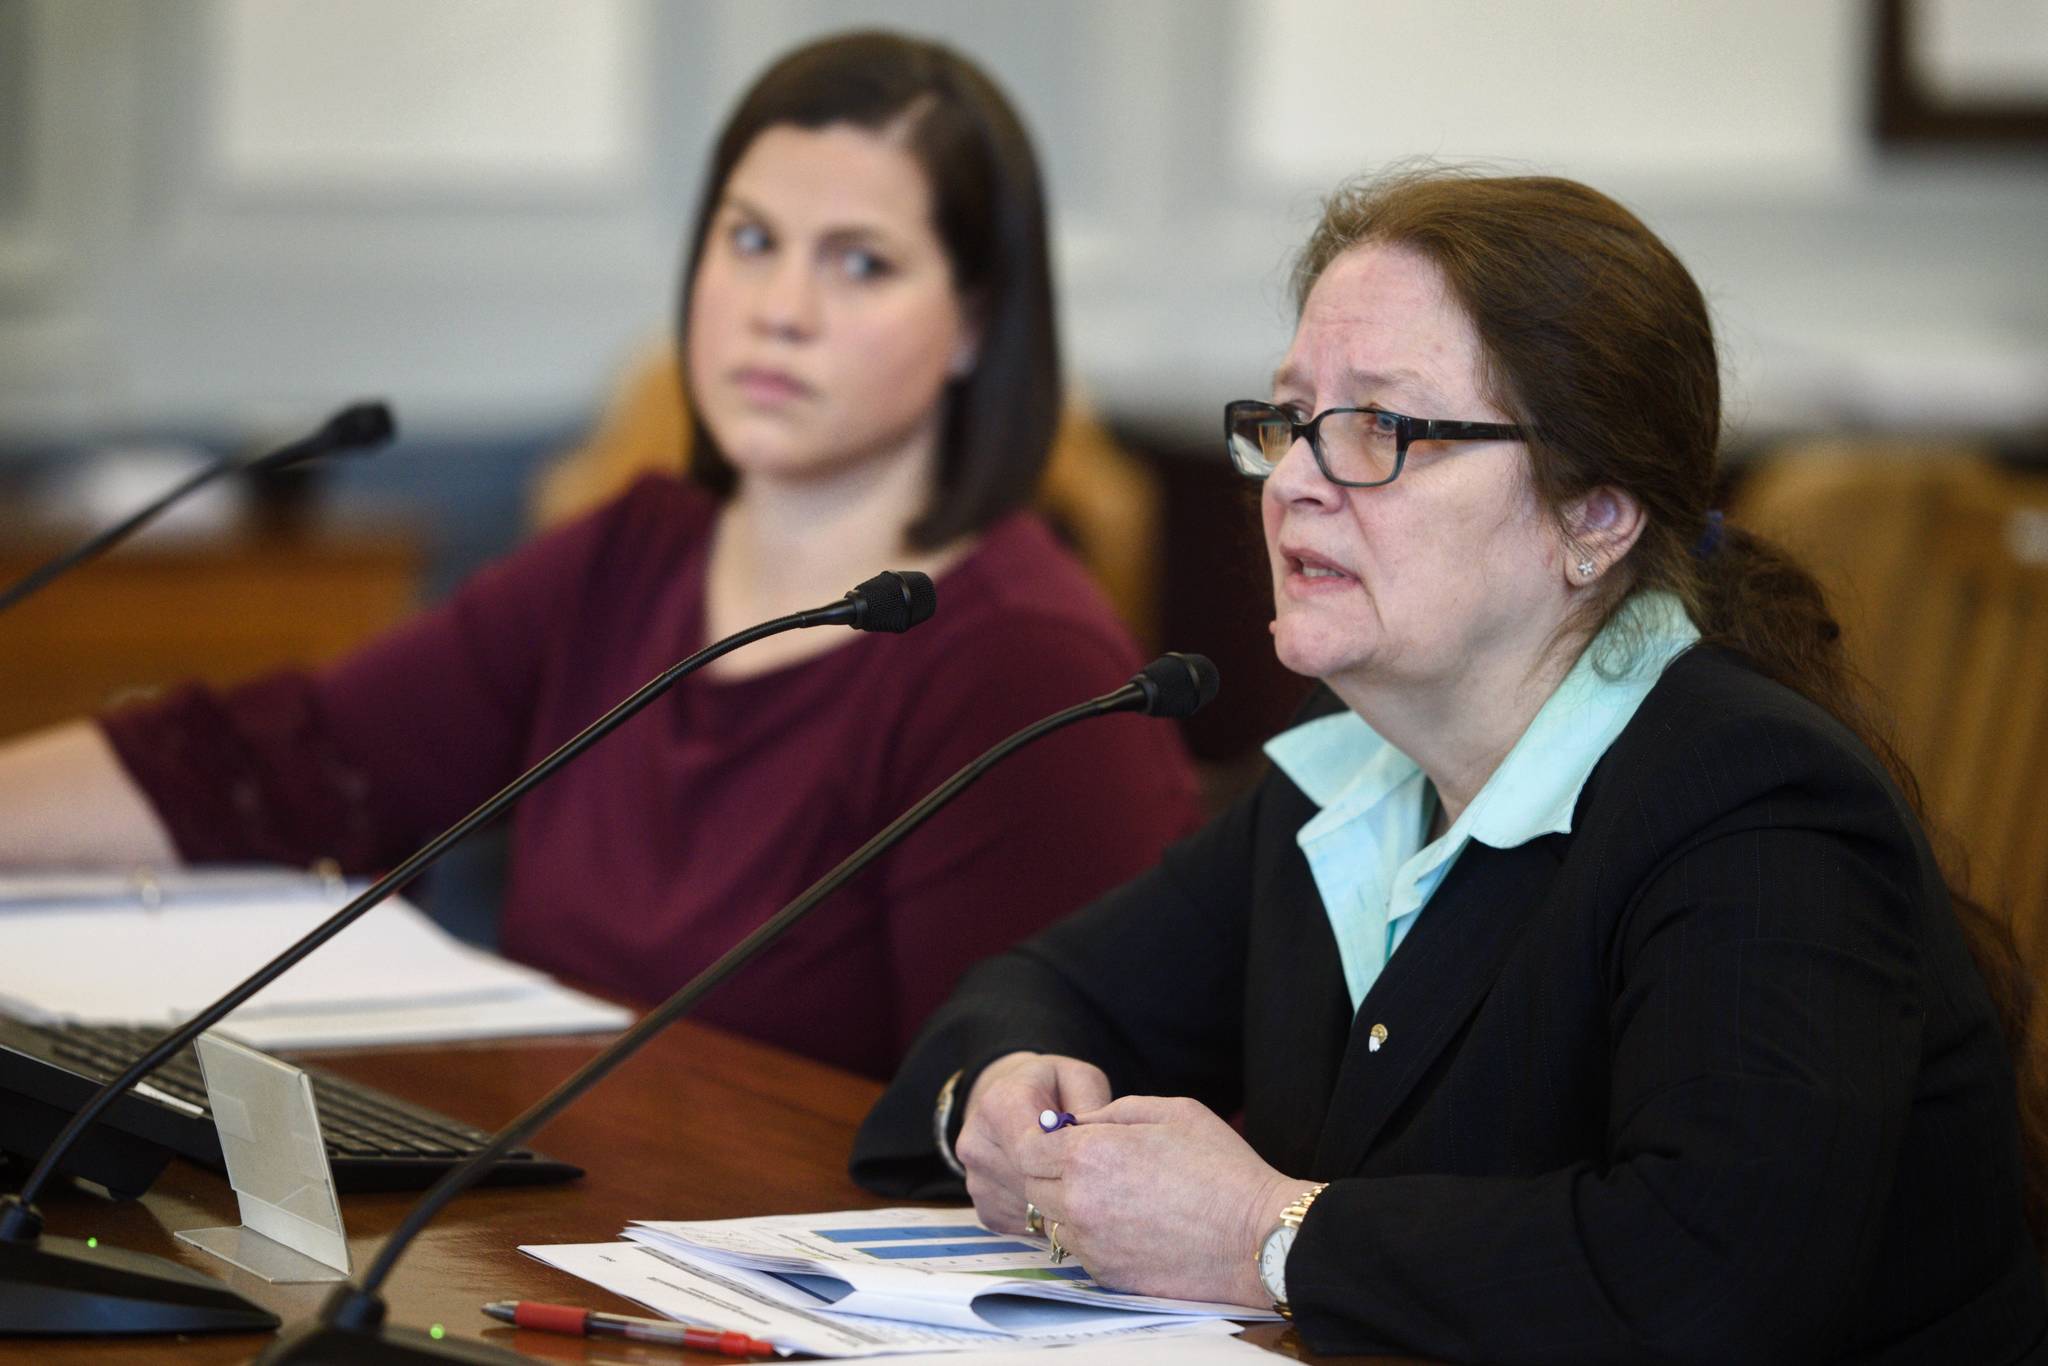 Cheryl Lowenstein, Director of the Division of Administration Services, left, speaks to the Senate Finance Committee with Lacey Sanders, Budget Director for the Office of Management and Budget, consolidation of departments on Monday, Feb. 25, 2019. (Michael Penn | Juneau Empire)